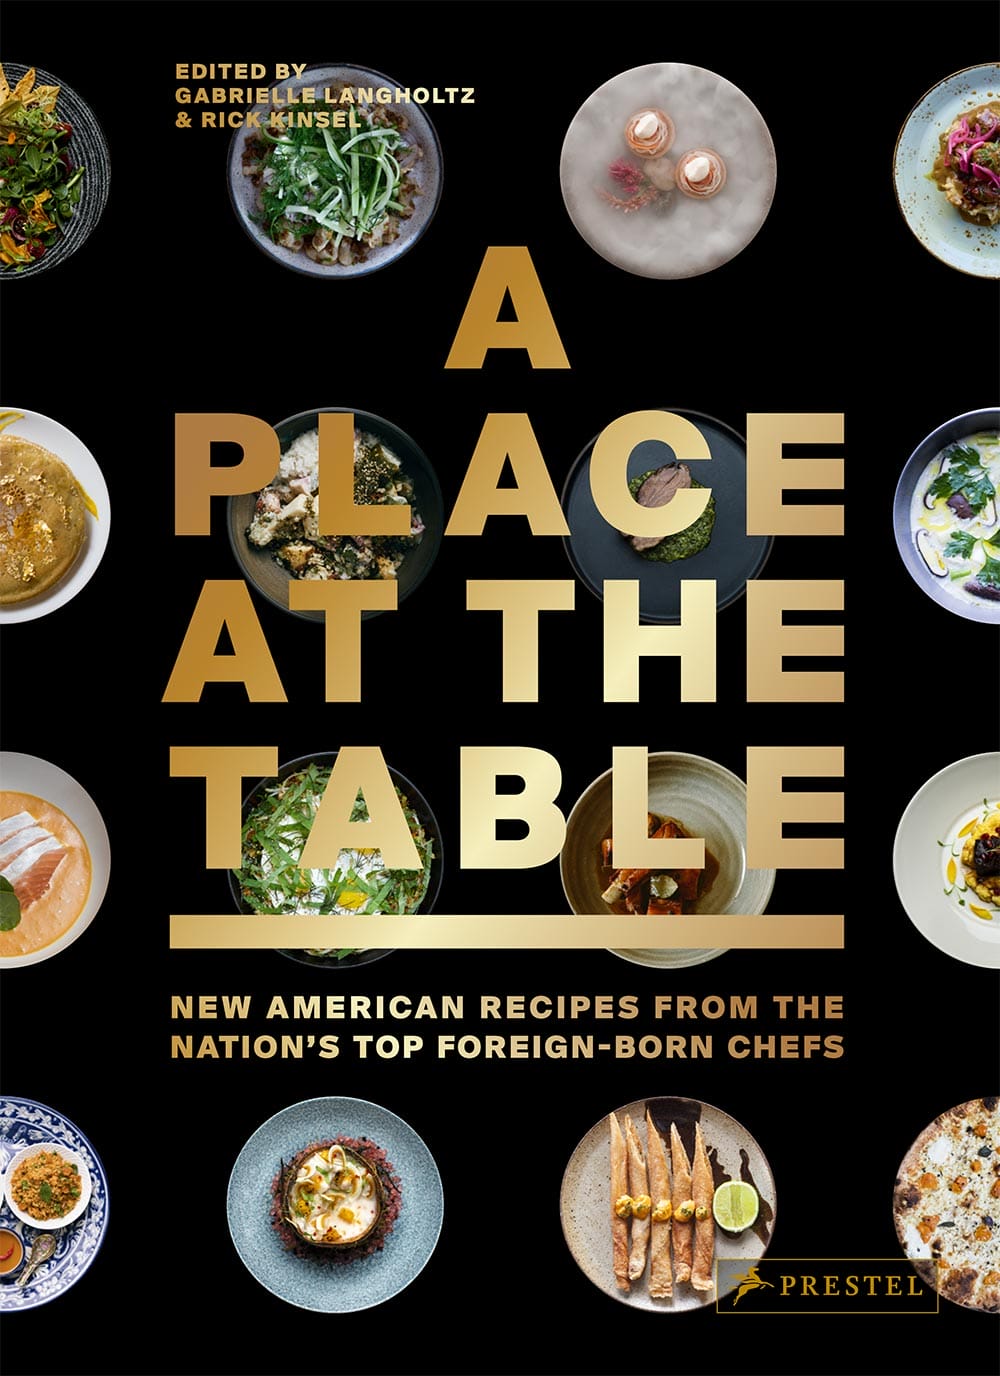 A Place At The Table bookcover